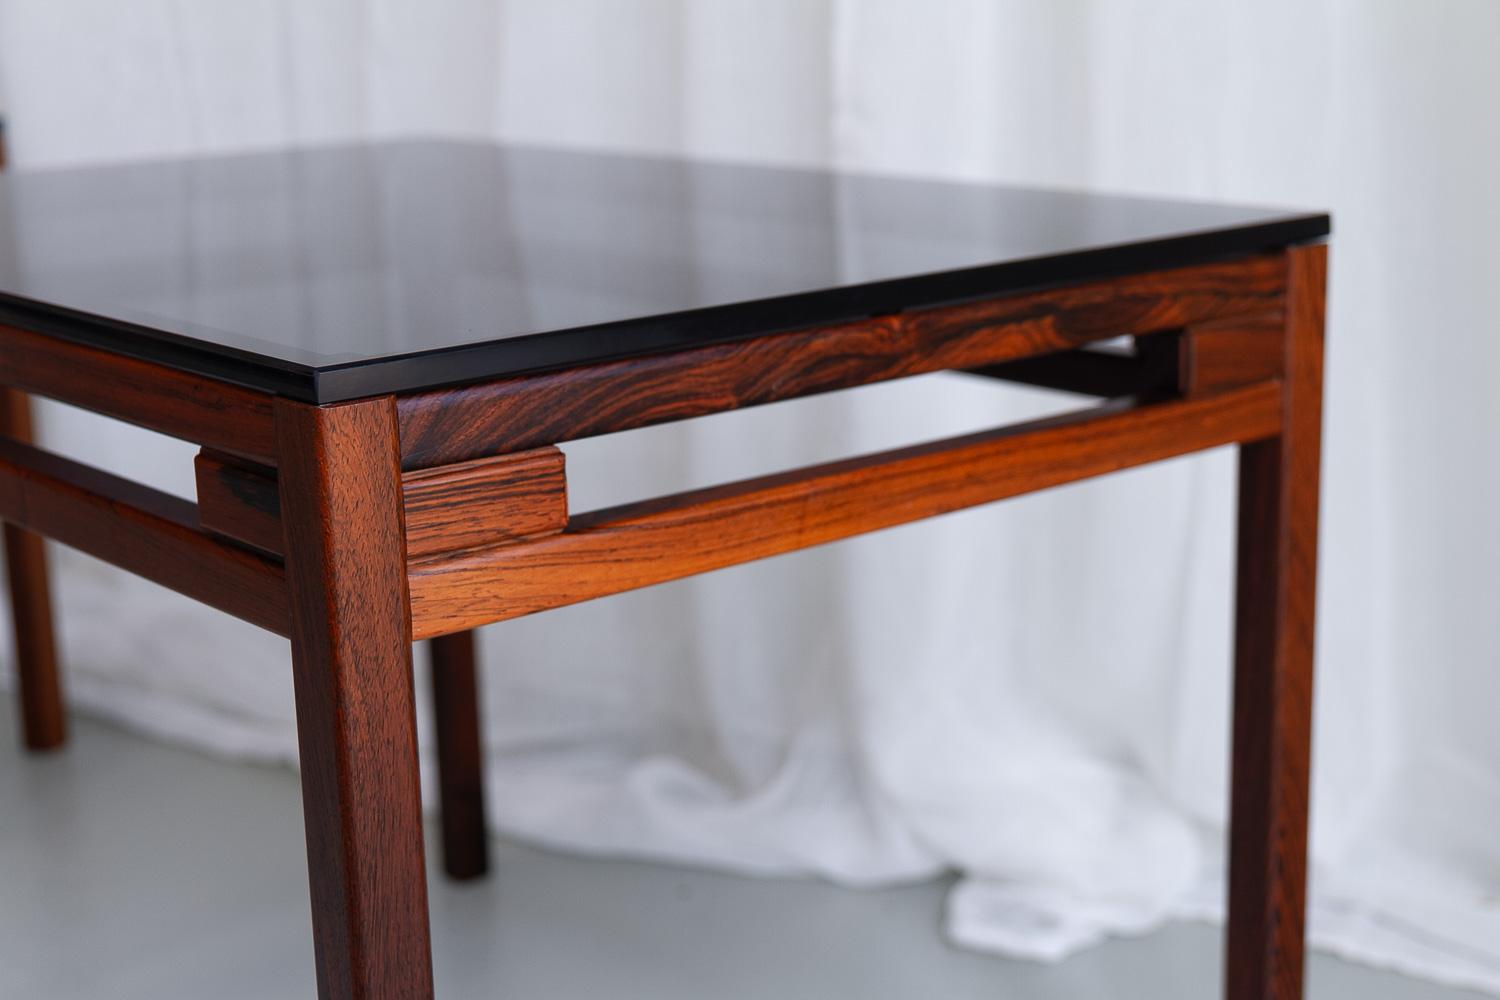 Mid-20th Century Danish Modern Side Tables in Rosewood and Glass, 1960s. Set of 2. For Sale